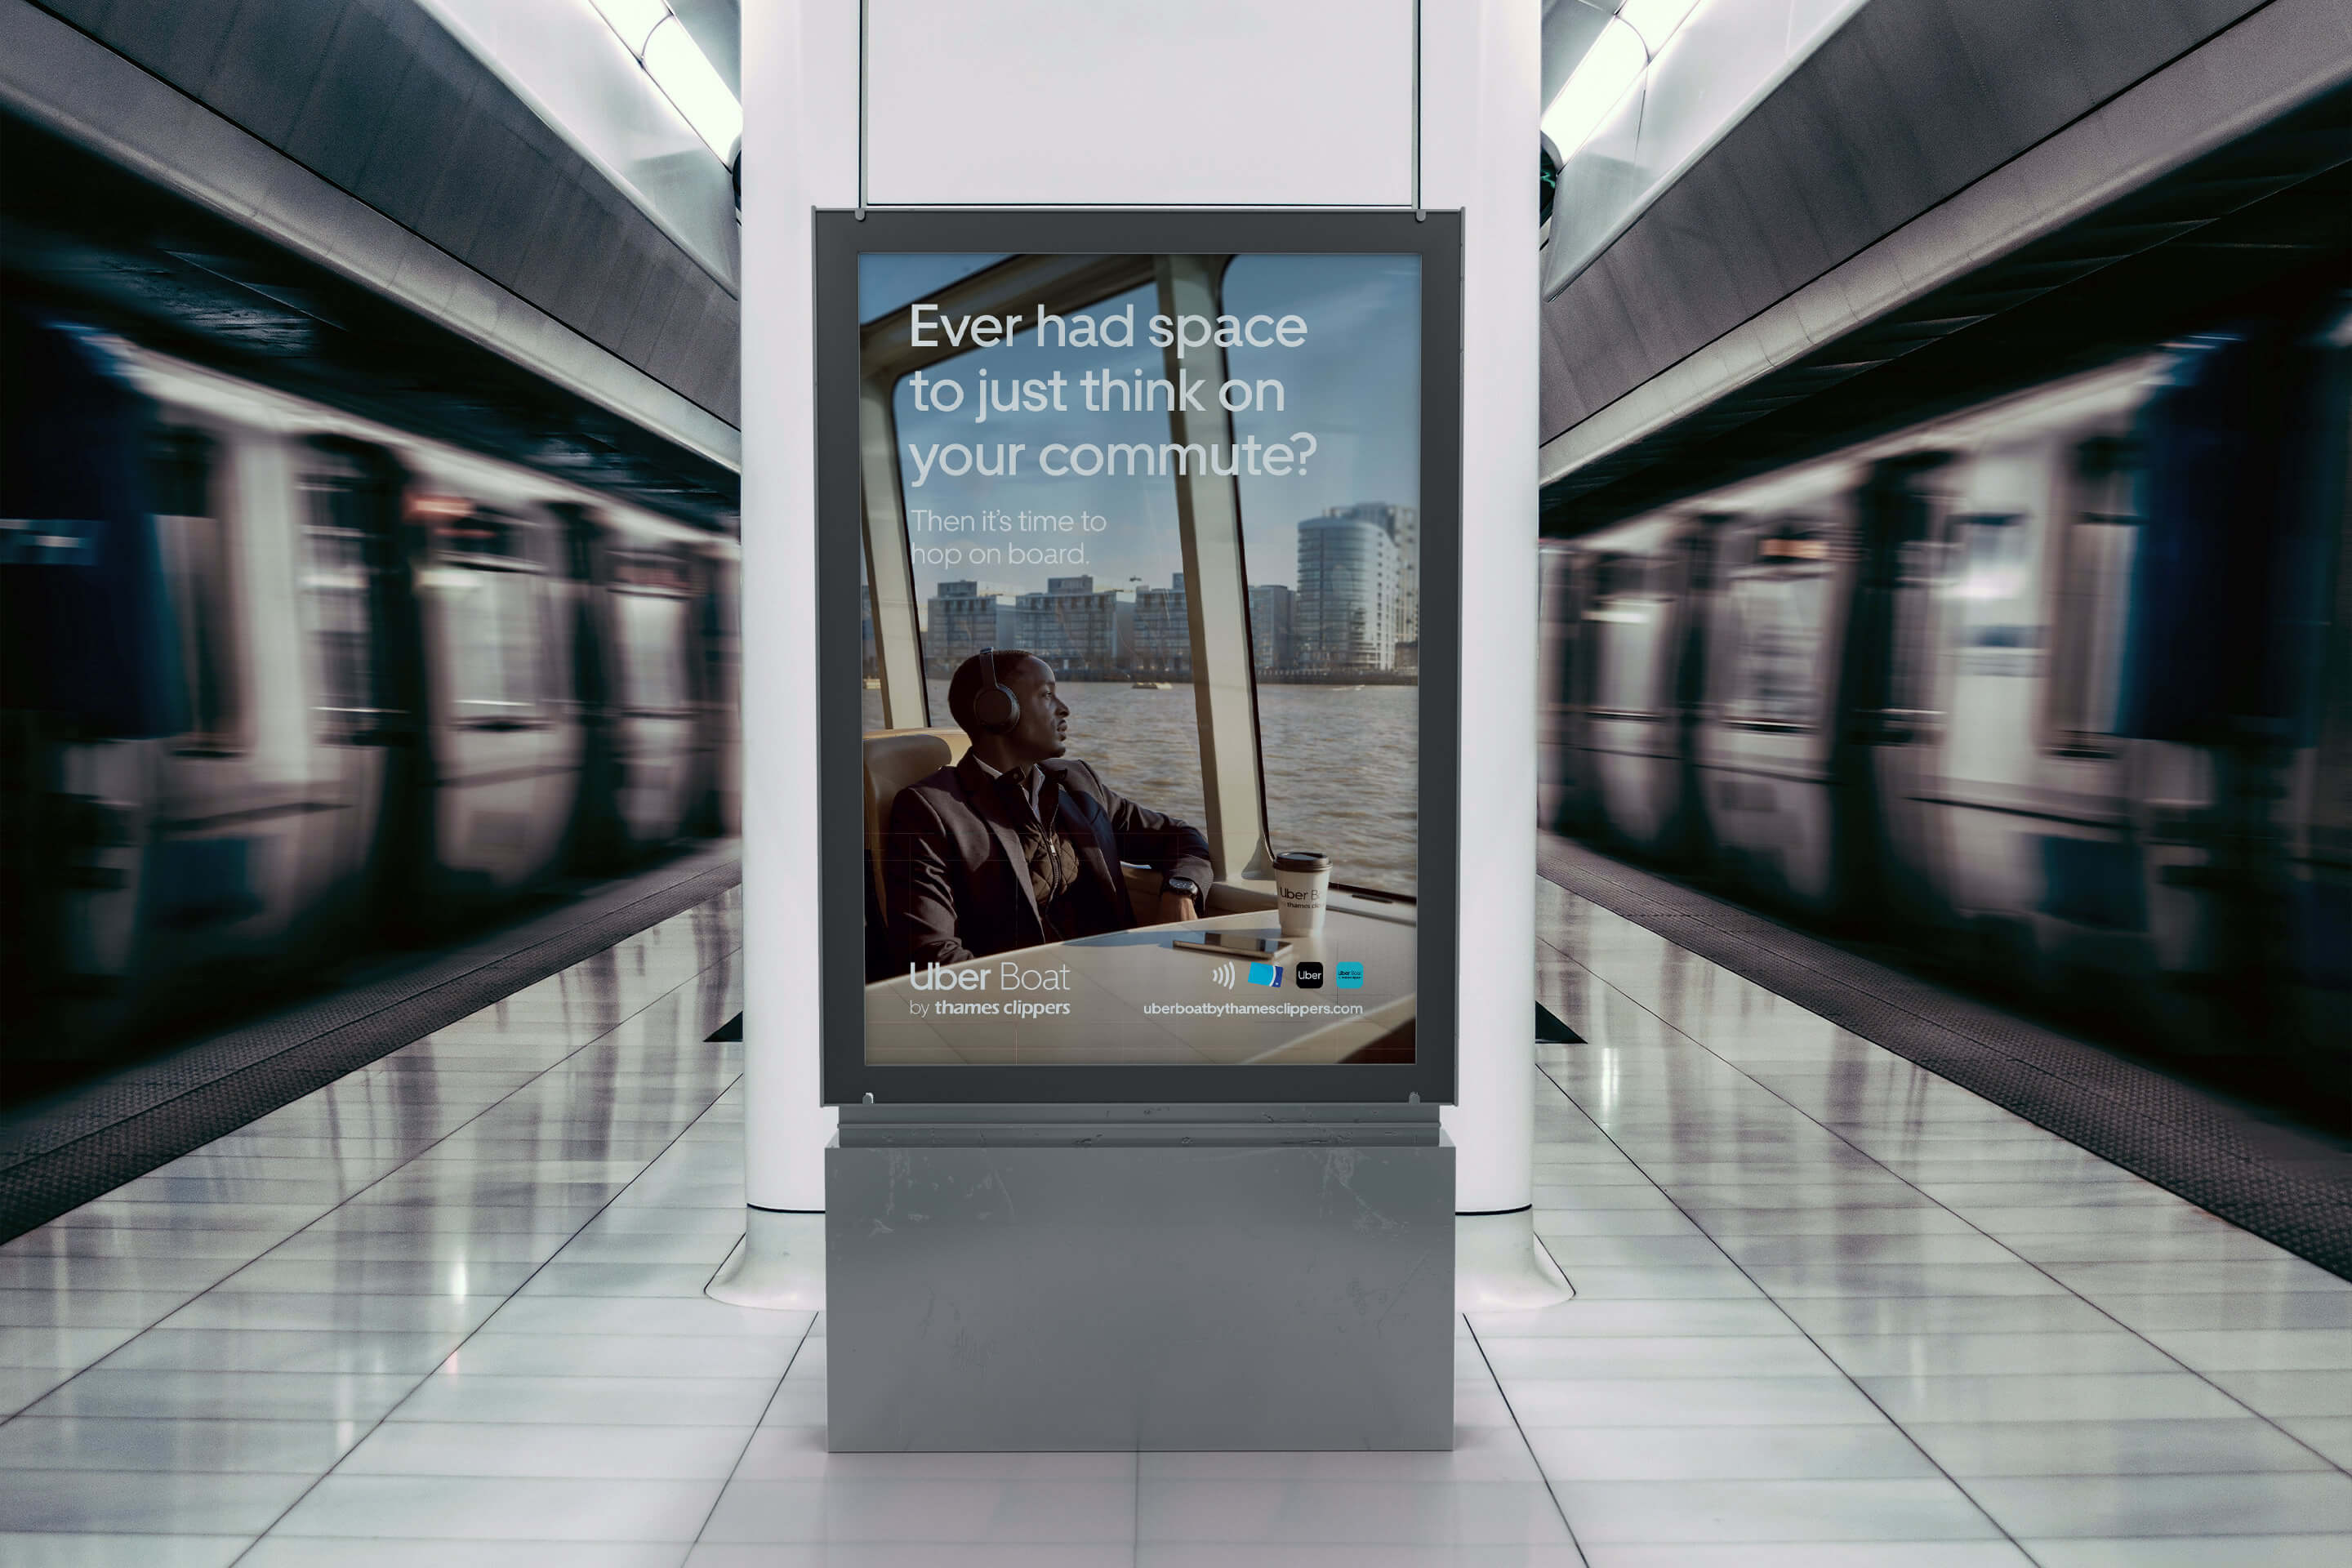 Thames Clippers Uber Boat - Underground Ad